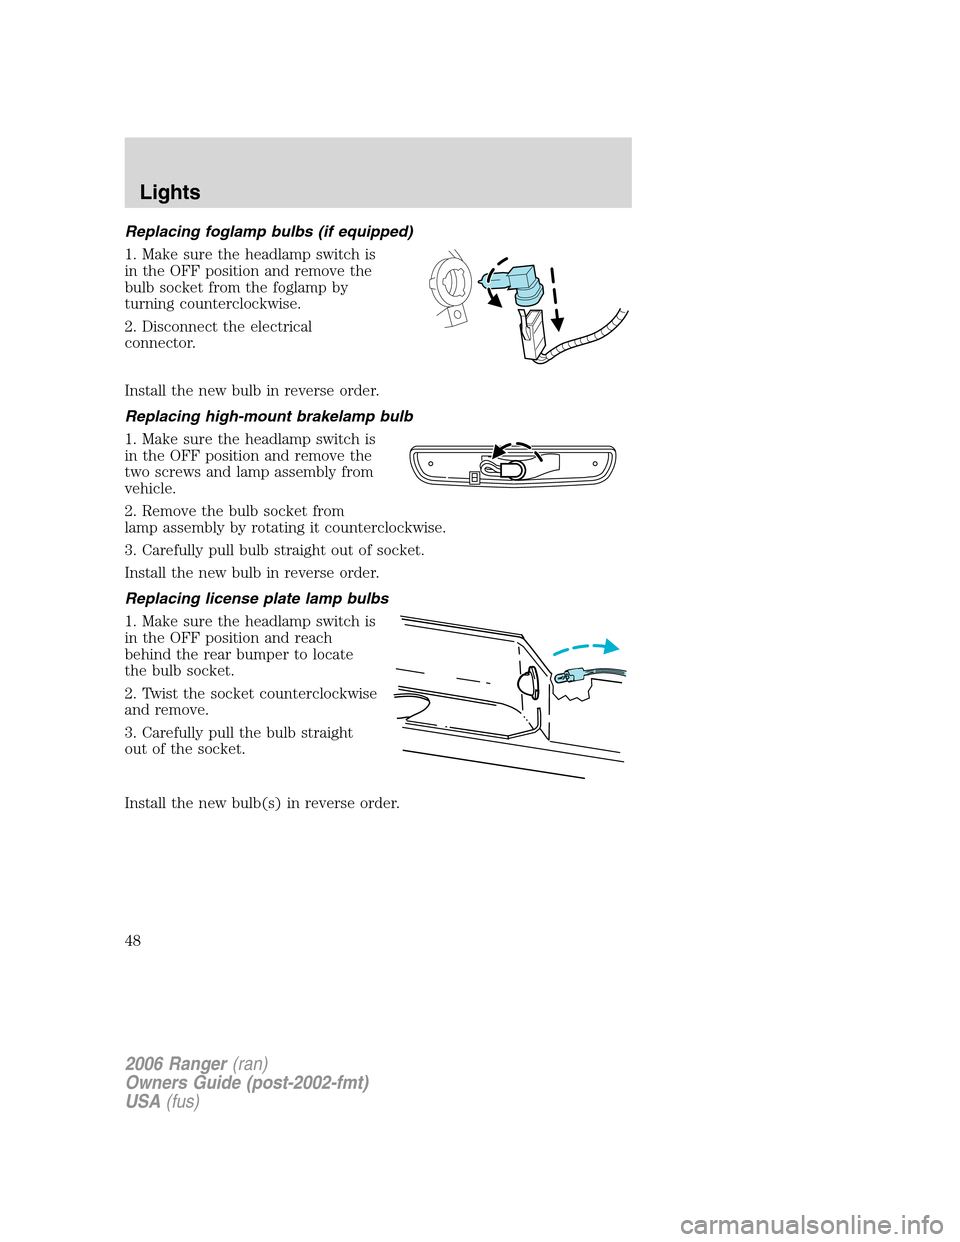 FORD RANGER 2006 2.G Owners Manual Replacing foglamp bulbs (if equipped)
1. Make sure the headlamp switch is
in the OFF position and remove the
bulb socket from the foglamp by
turning counterclockwise.
2. Disconnect the electrical
conn